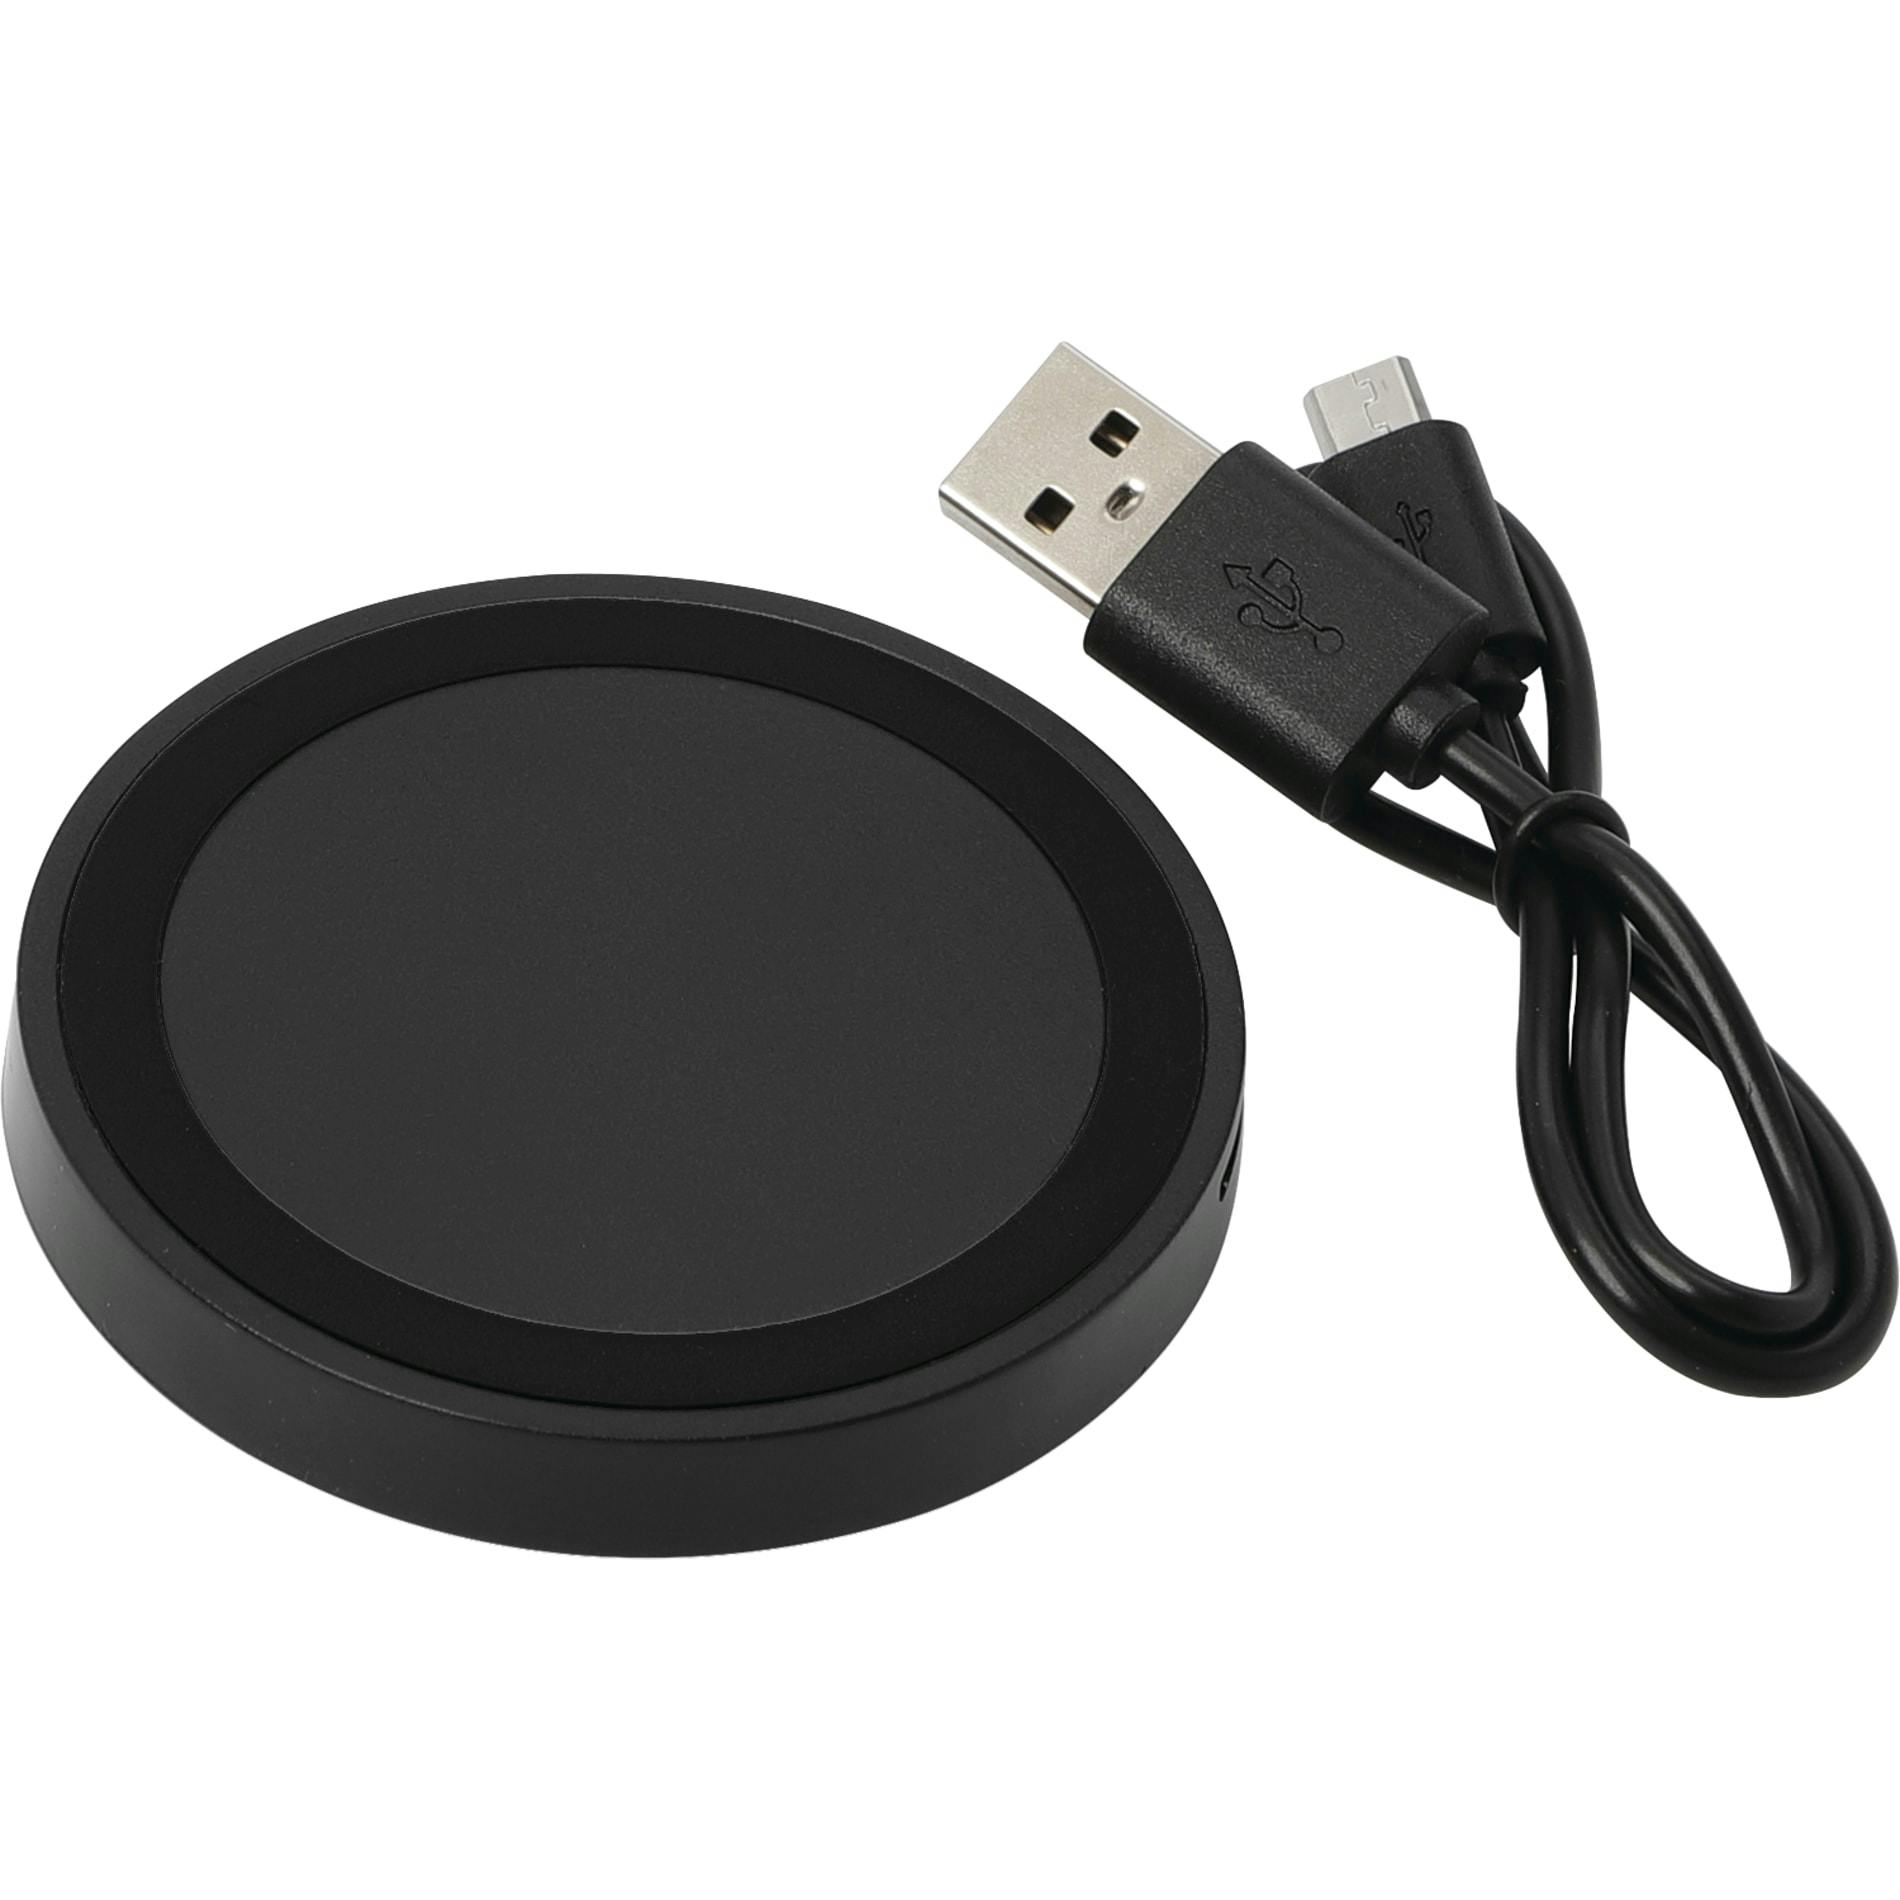 Sphere Wireless Charging Pad - additional Image 4